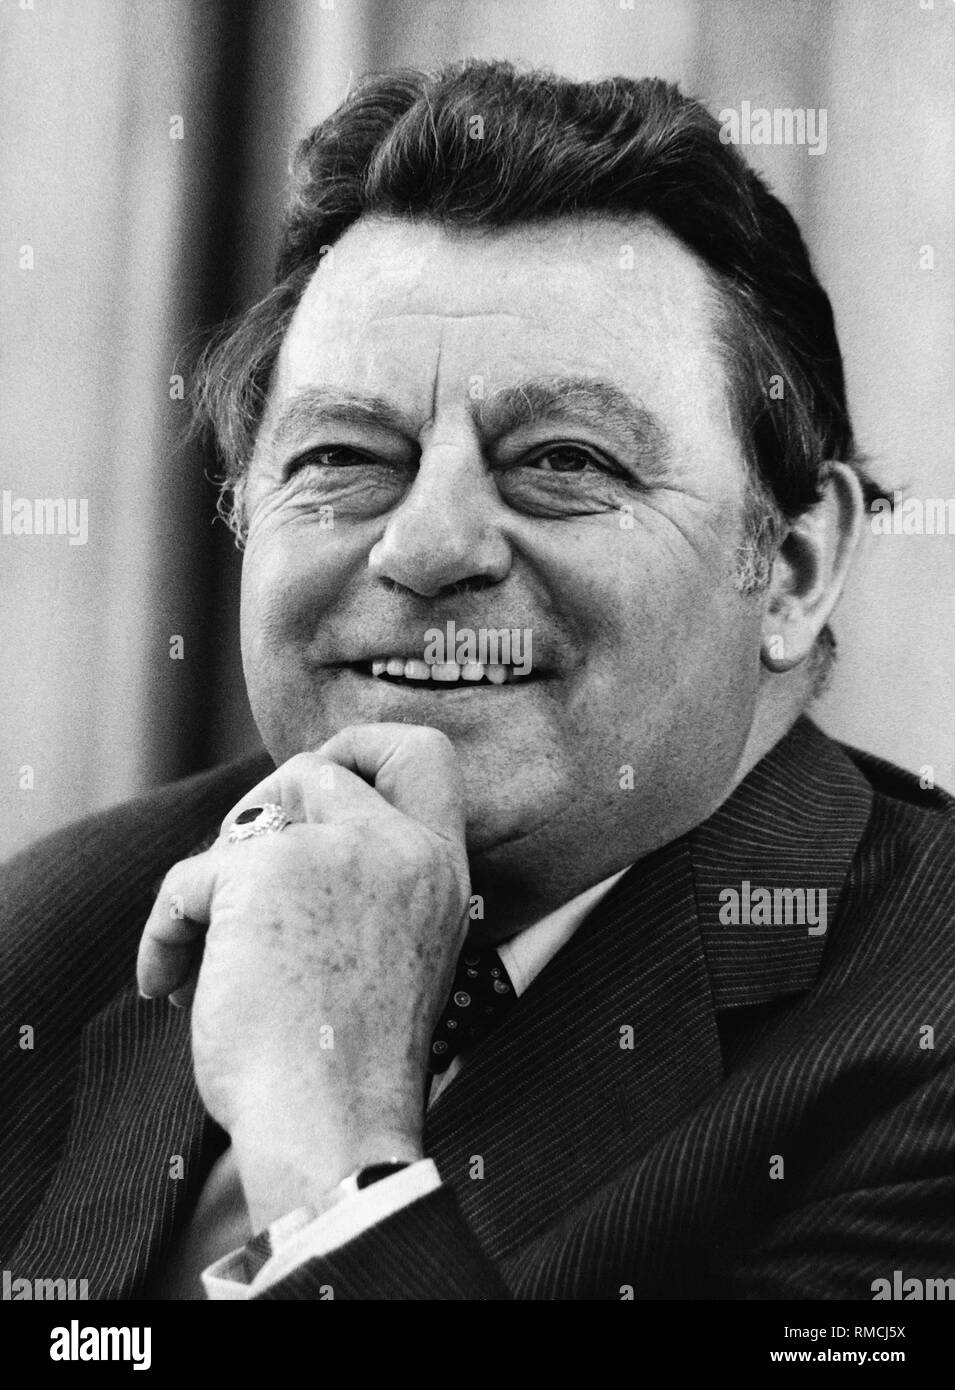 Franz Josef Strauss, Minister President of Bavaria and chancellor candidate of the CDU / CSU-Union. Stock Photo